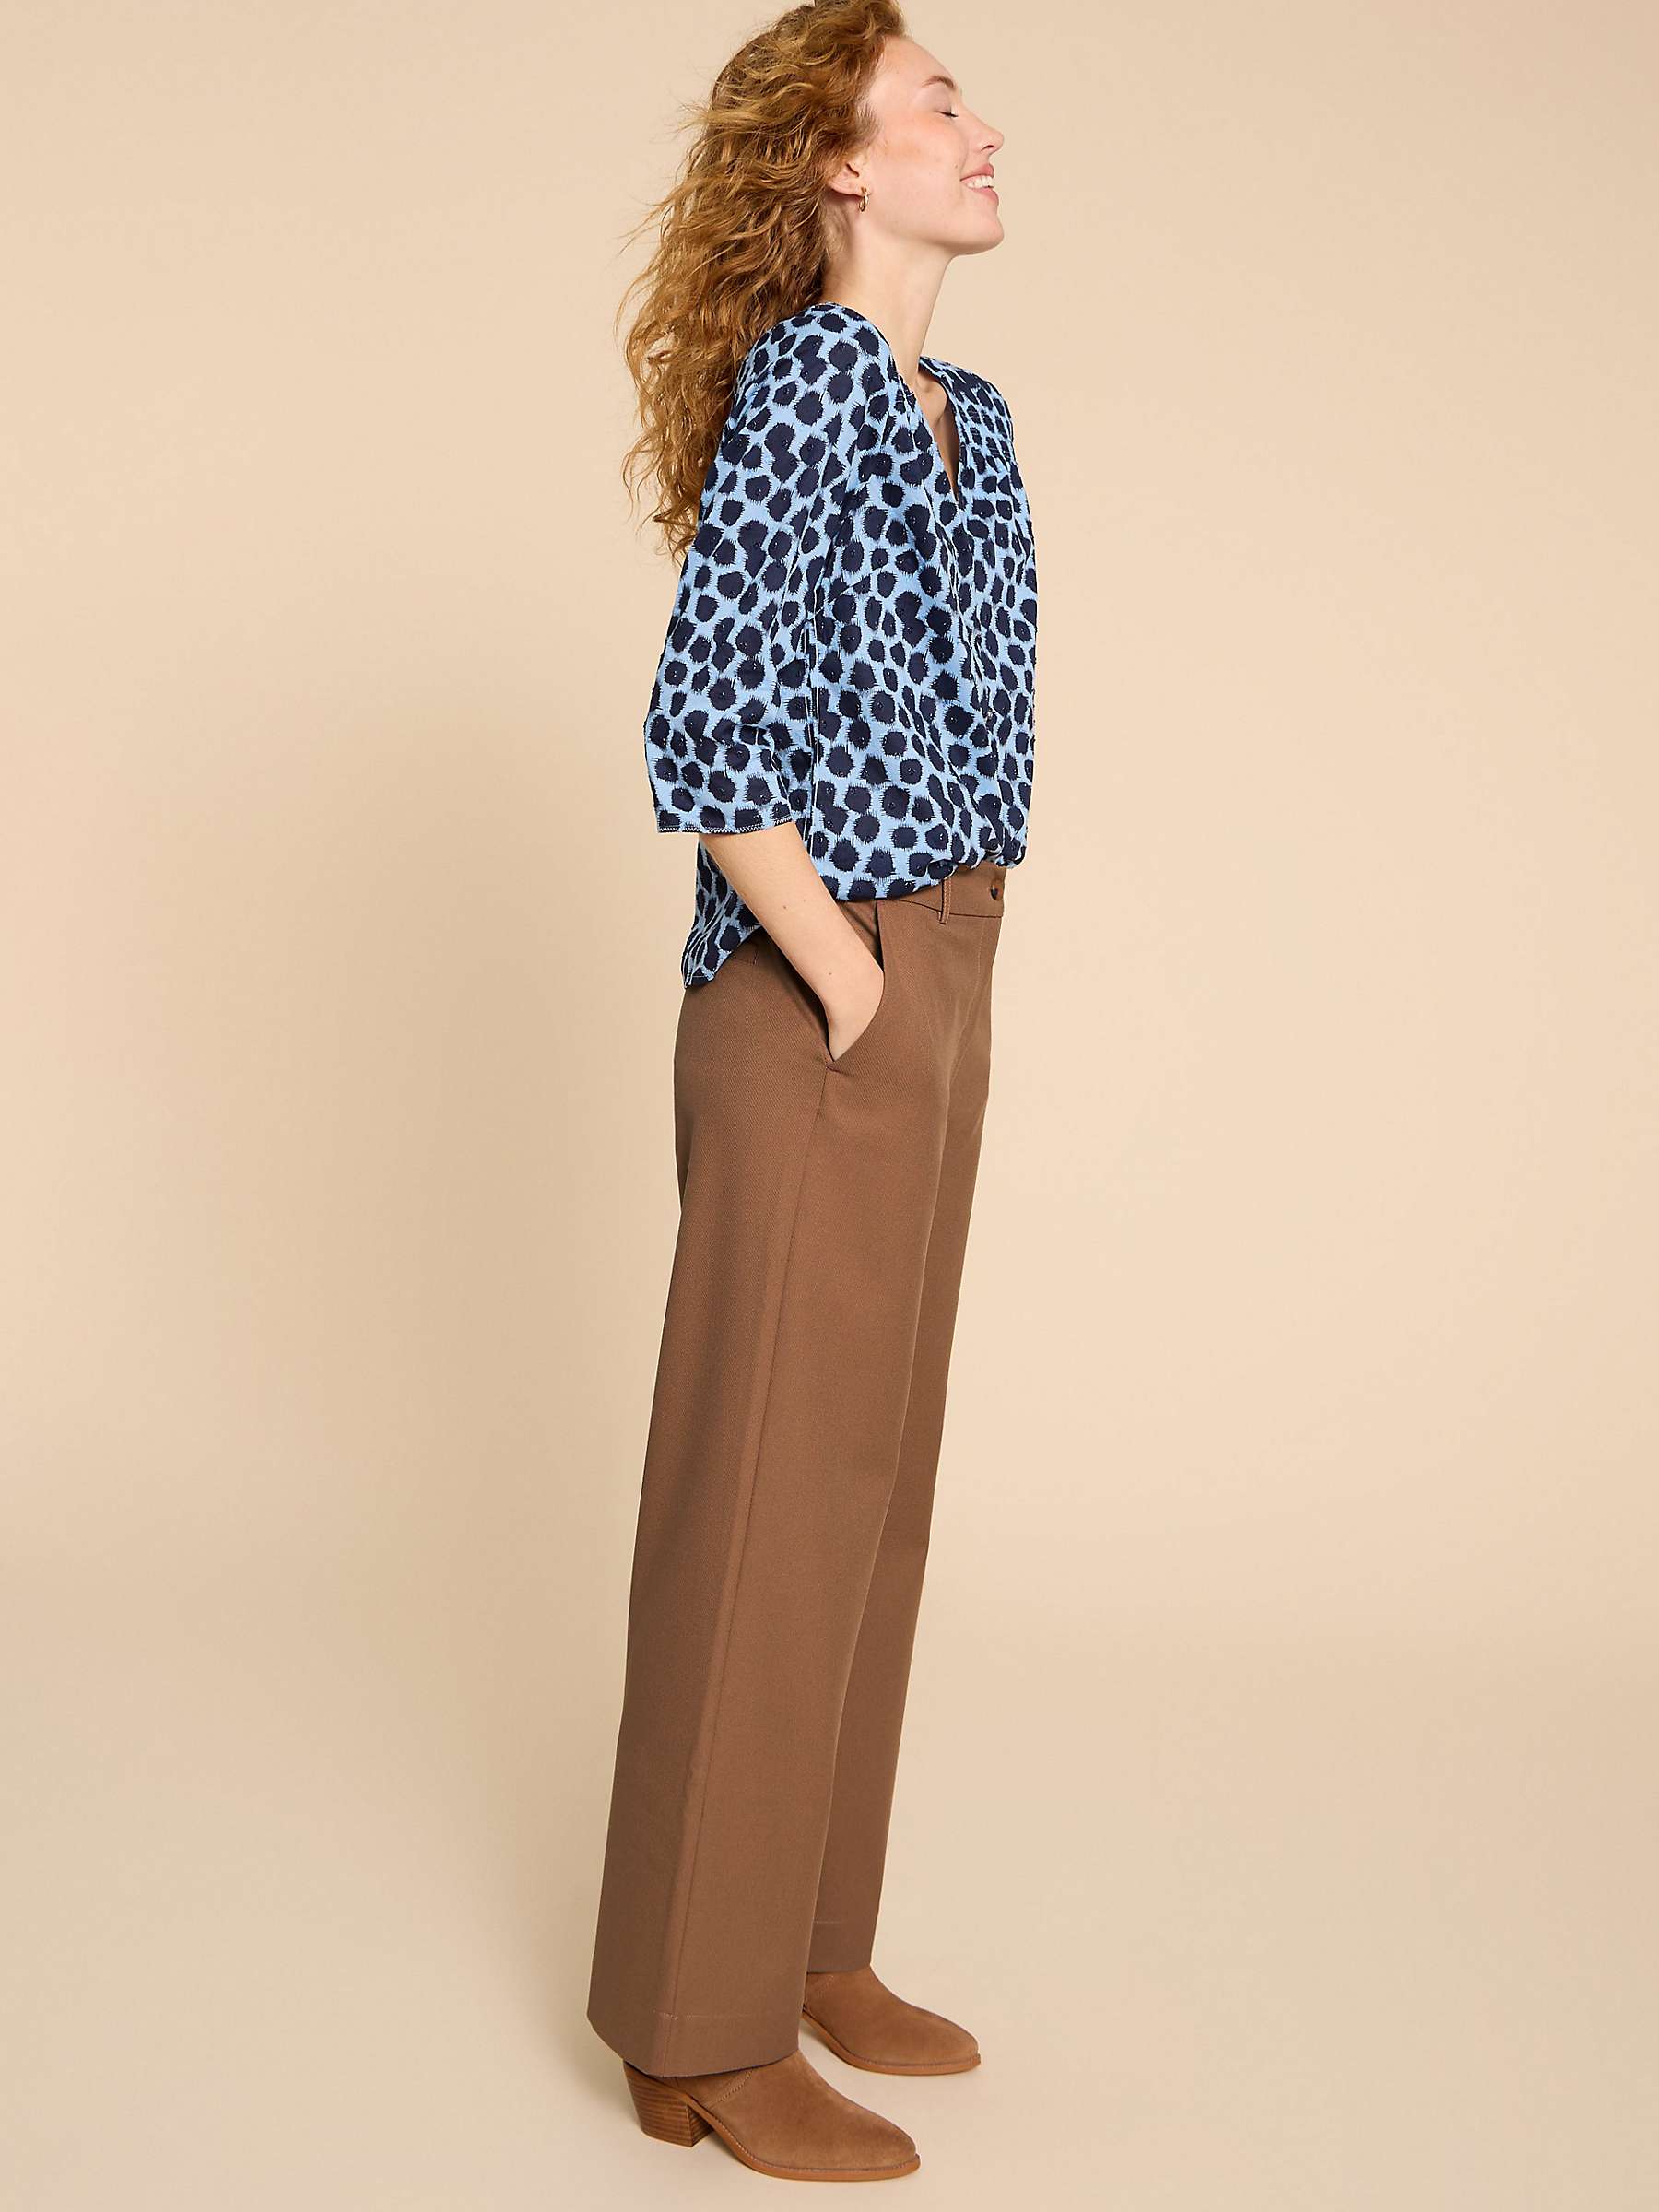 Buy White Stuff Tailored Wide Leg Trousers, Mid Tan Online at johnlewis.com